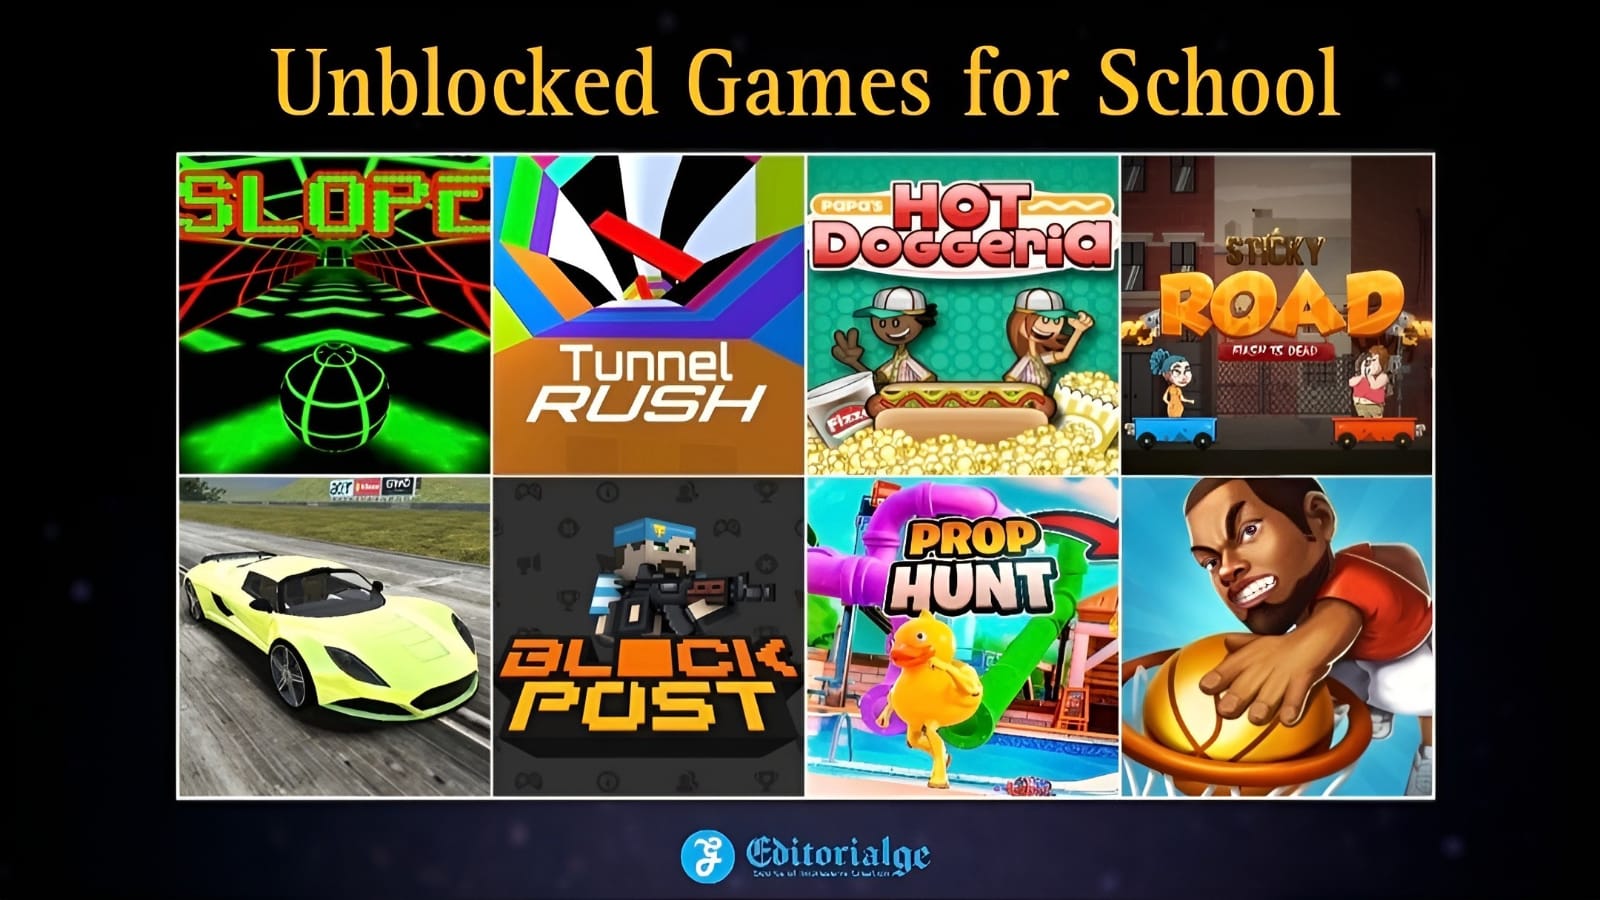 Get Ready for an Amazing Experience with Unblocked Games for School